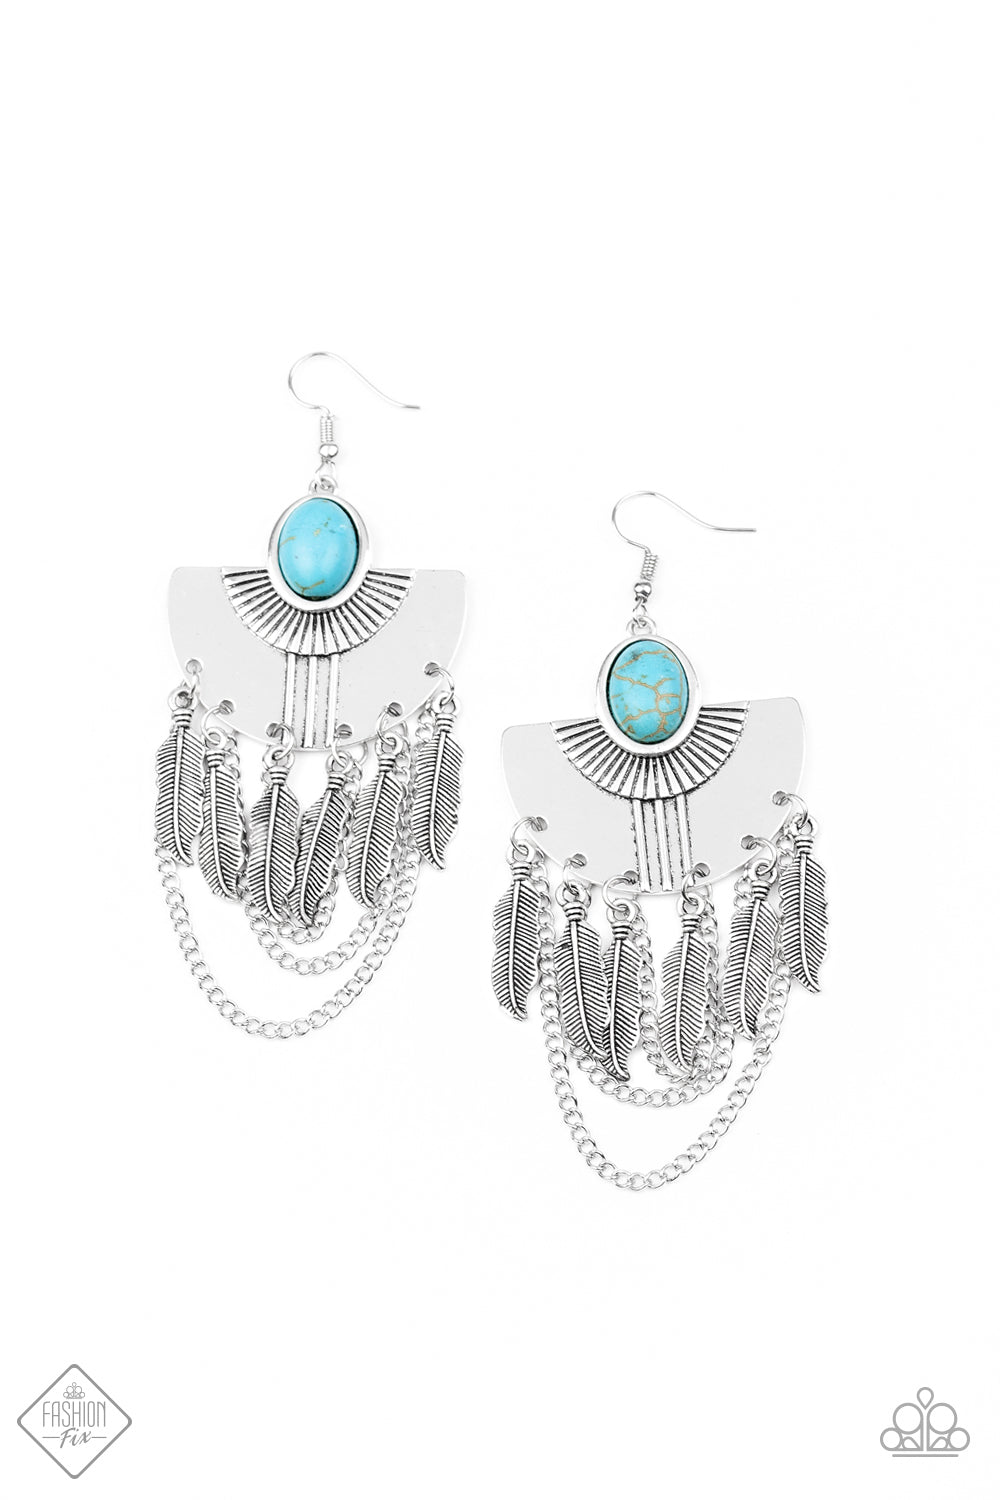 Paparazzi Accessories Sure Thing Chief! - Blue Earrings - Lady T Accessories